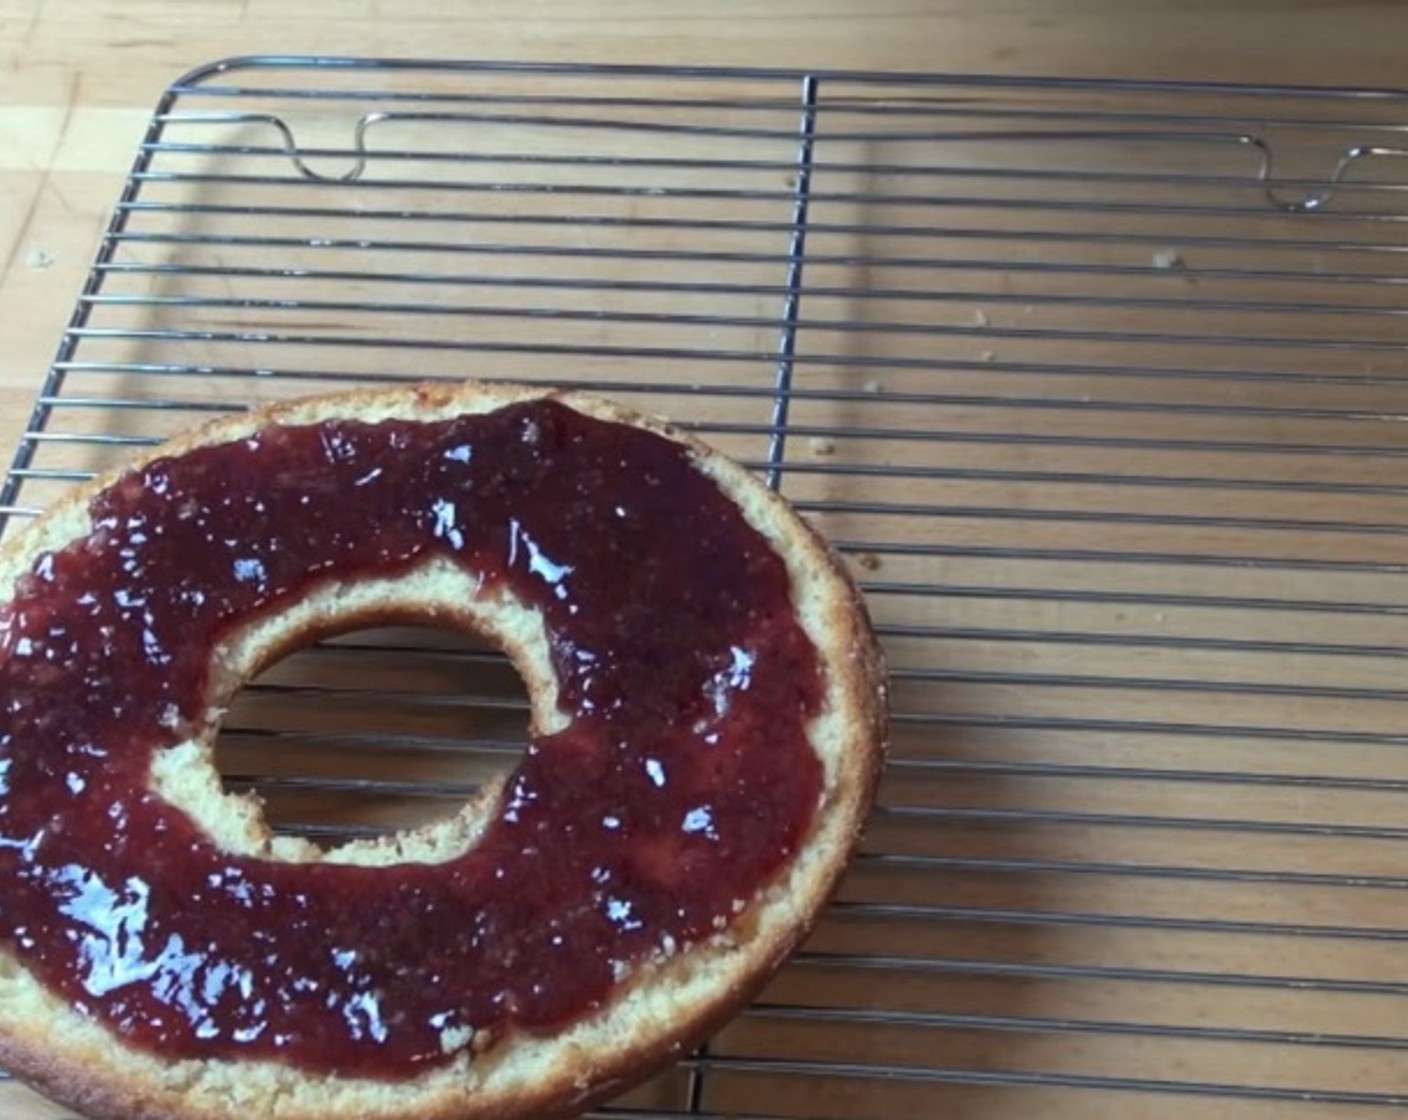 step 8 Spread Fruit Jam (1/2 cup) over one half of the cake as the filling. Gently place the other half on top.